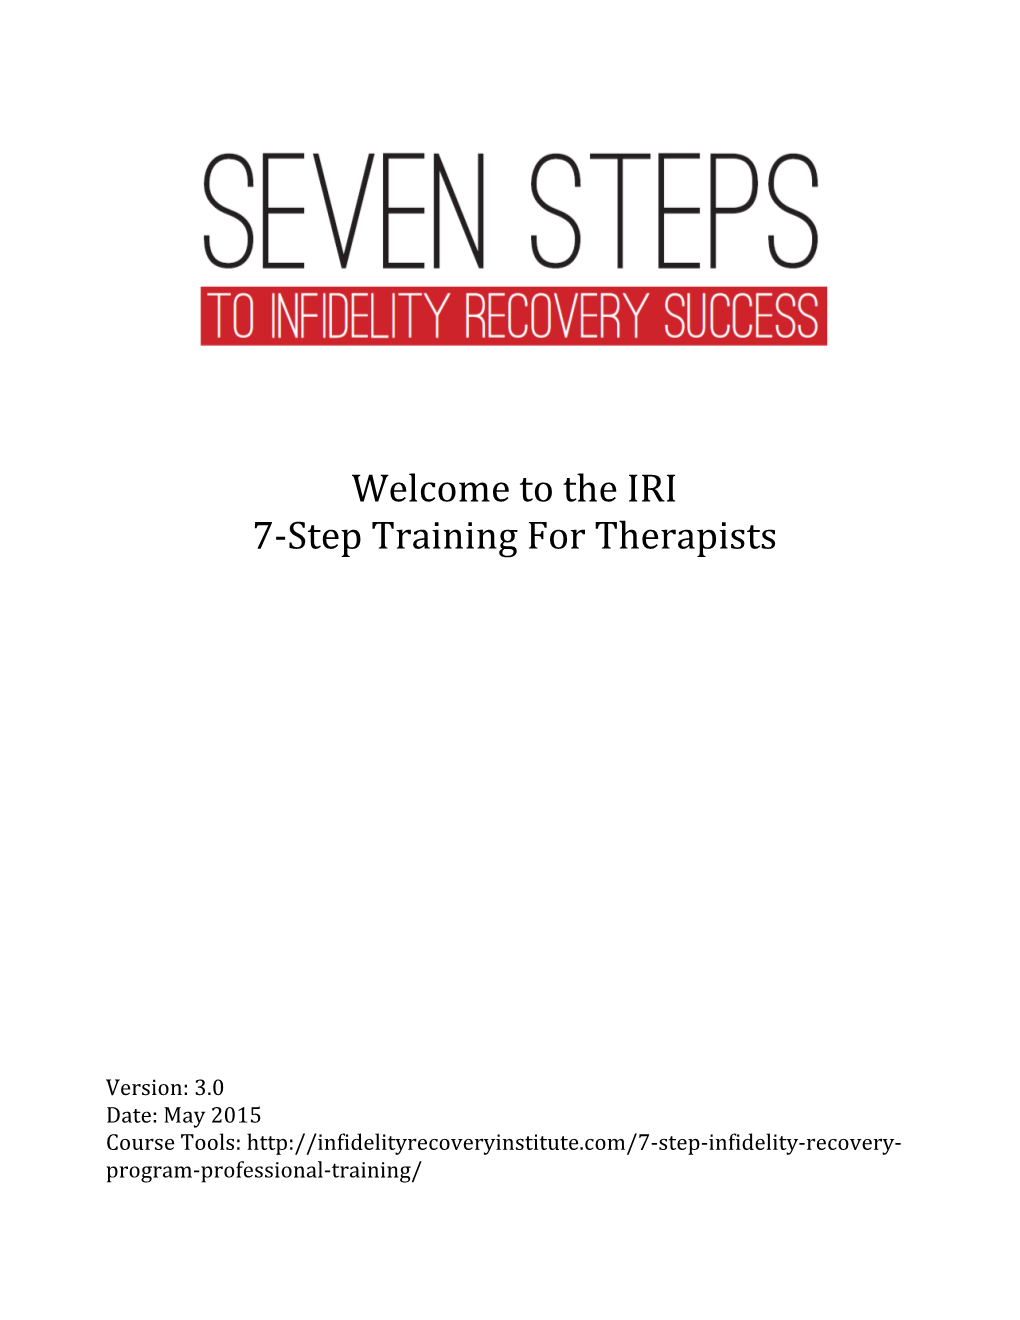 Welcome to the IRI 7-‐Step Training for Therapists